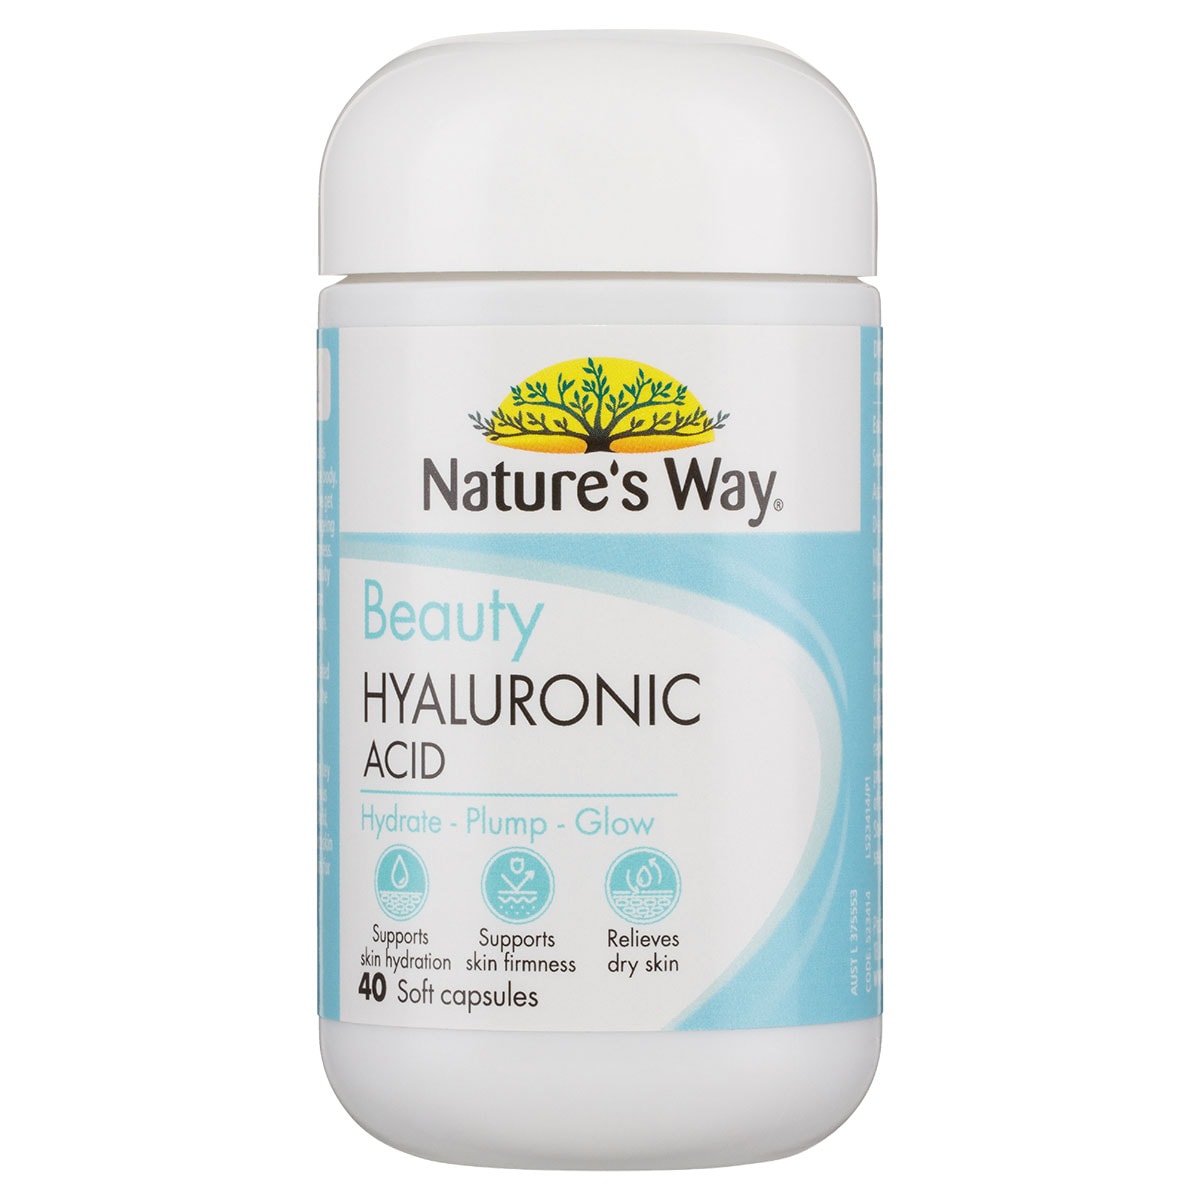 Natures Way Beauty Hyaluronic Acid 40 Soft Capsules